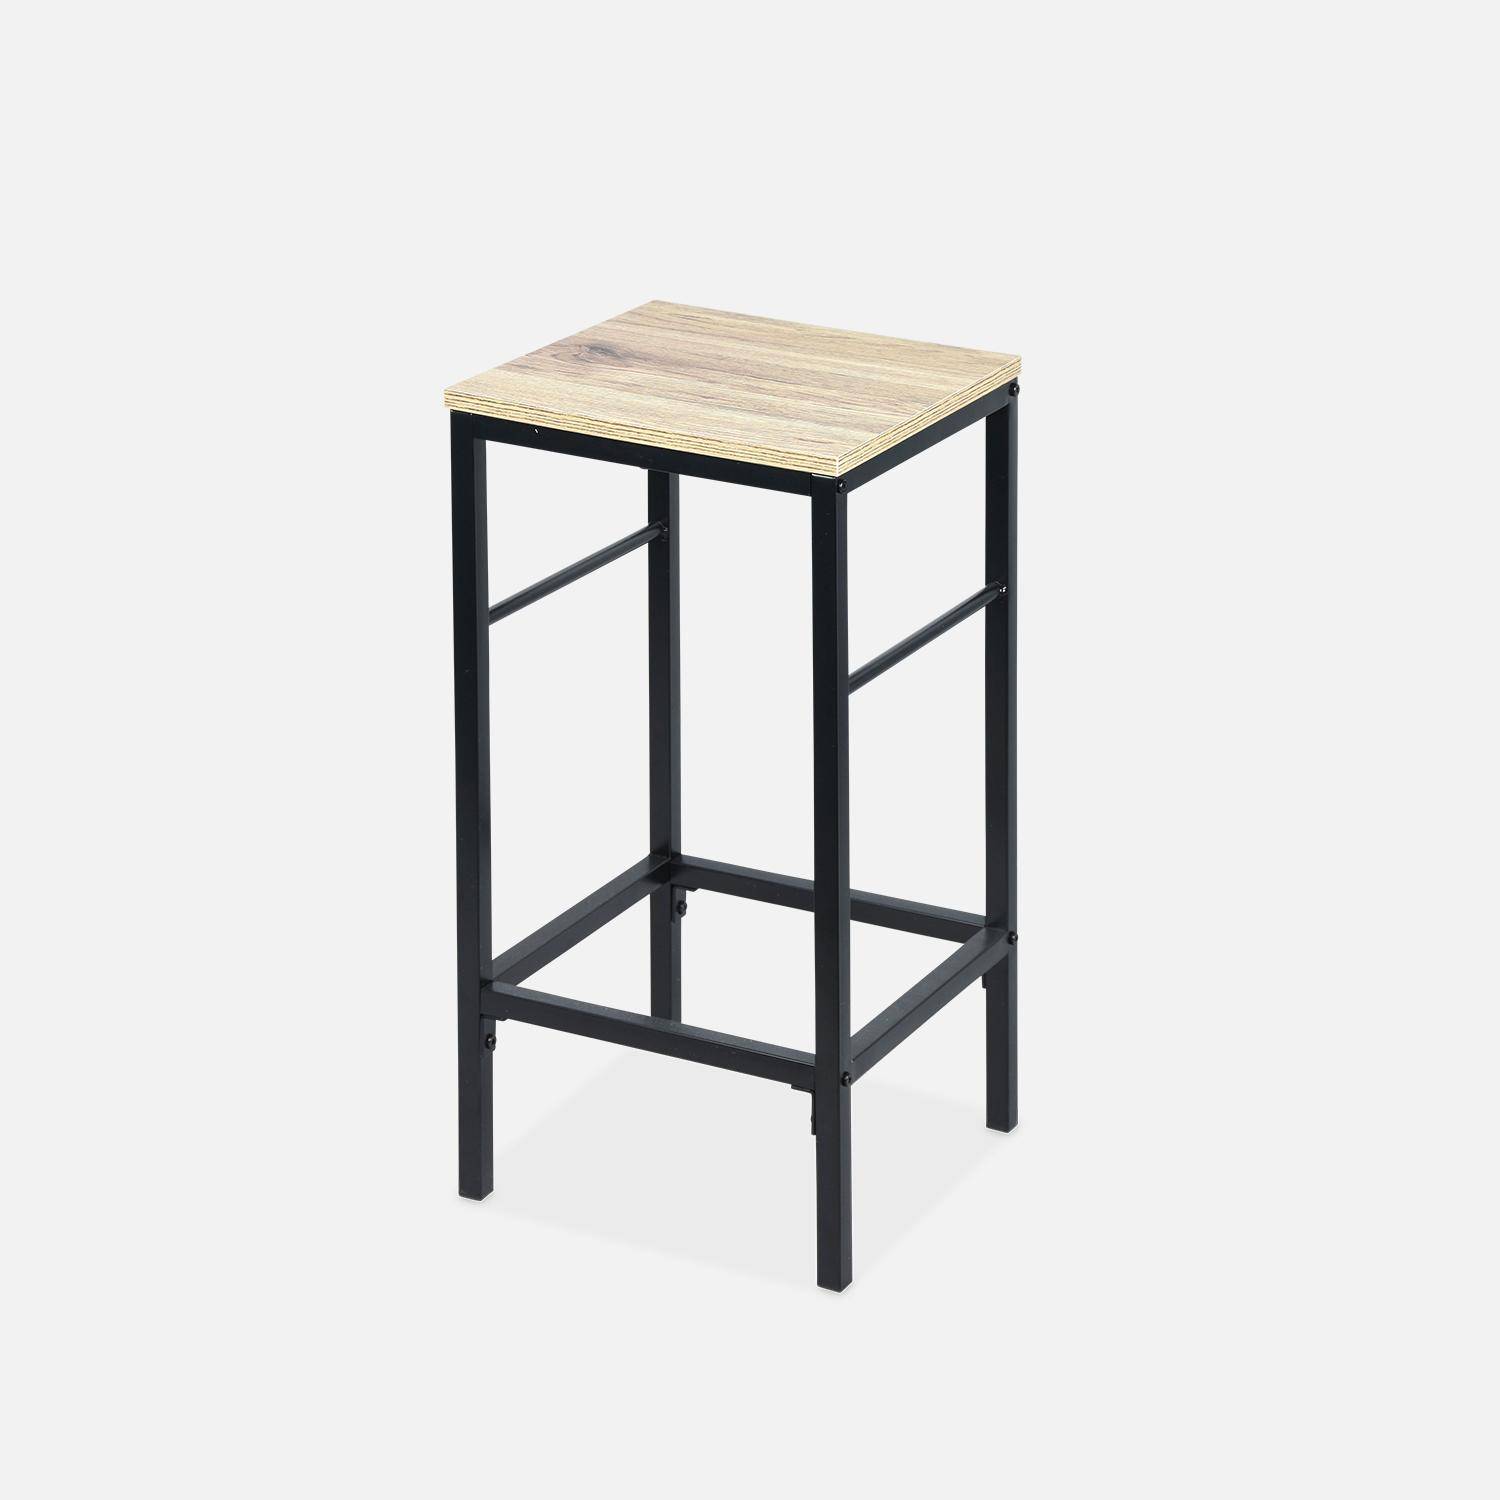 High table with two stools and two shelves, wood and metal decor, loft, W100xD60xH95cm Photo8